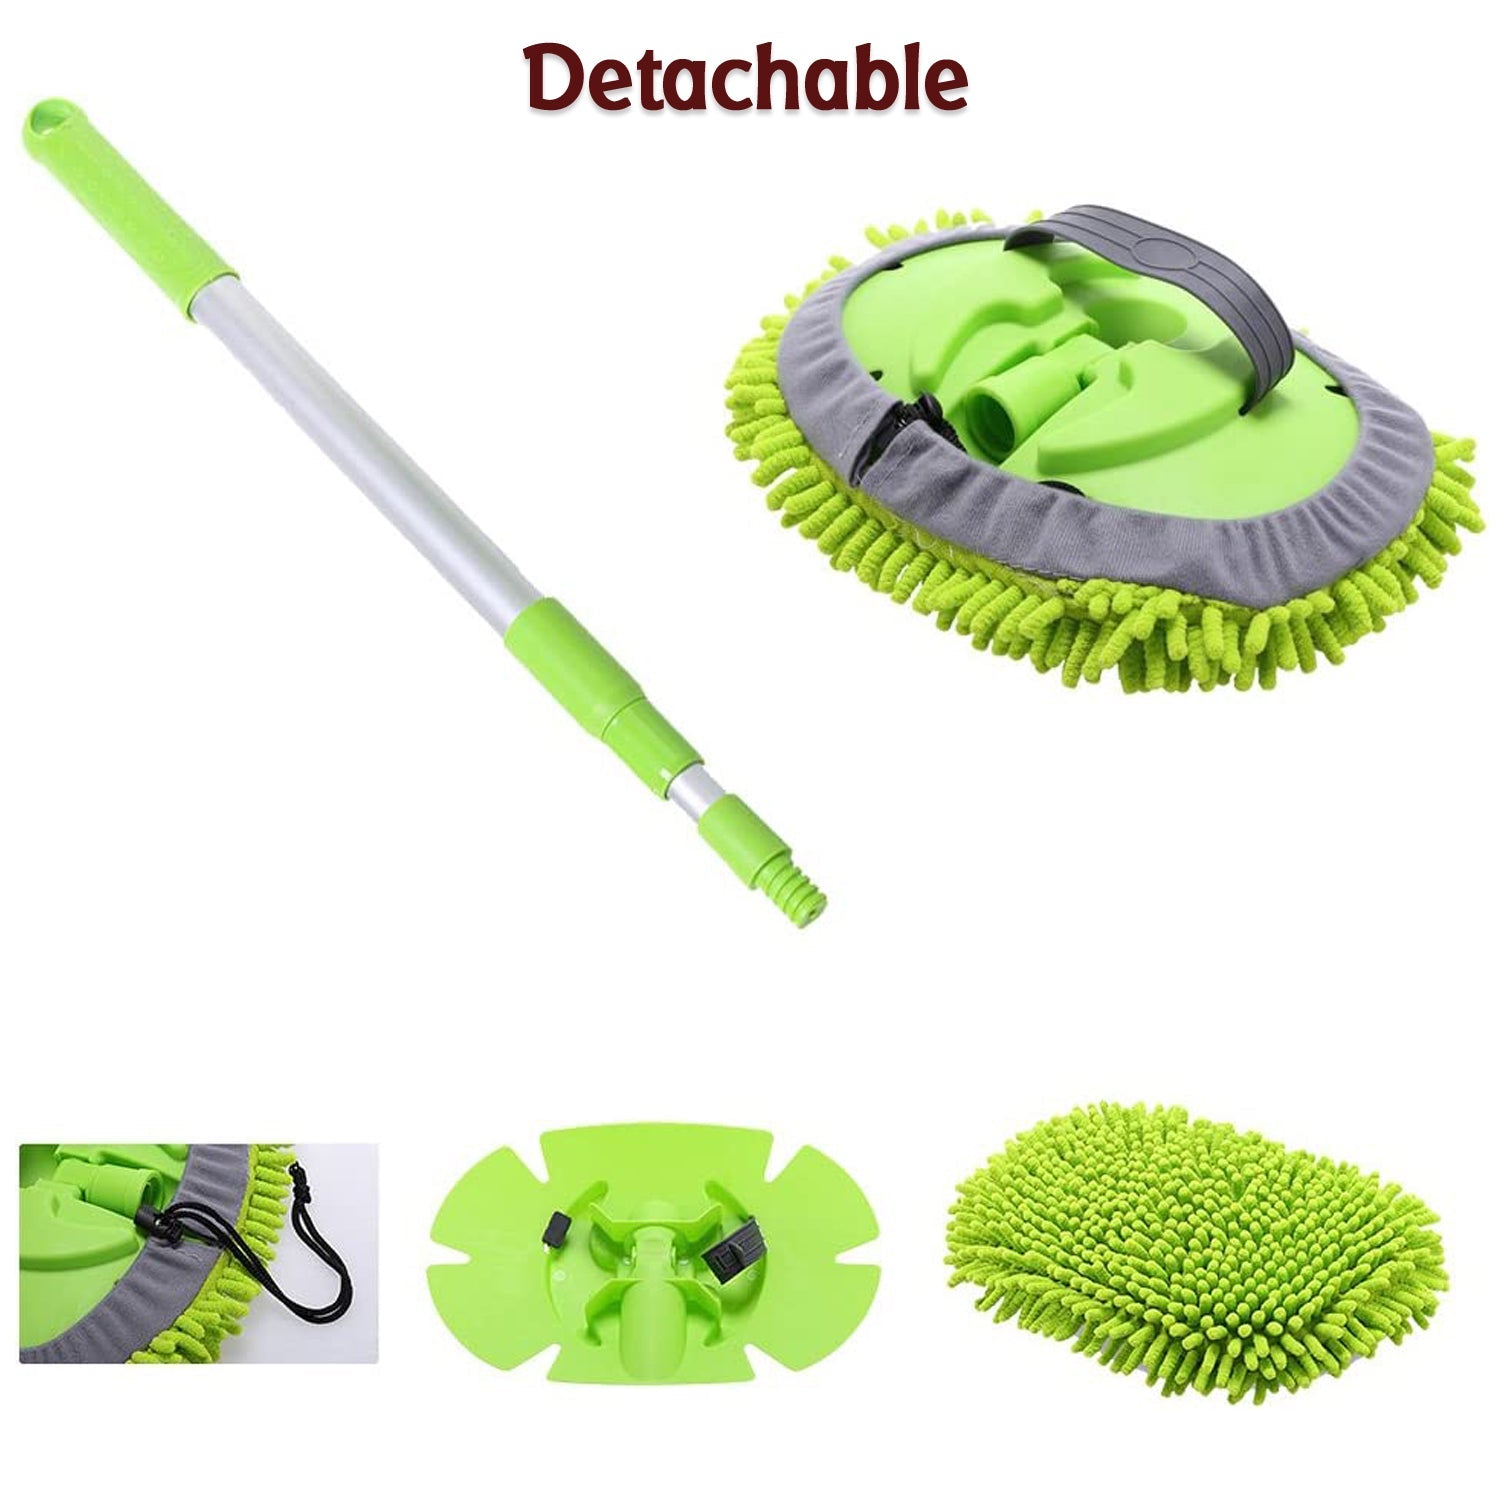 4987 Car Duster Microfiber Flexible Duster Car Wash | Car Cleaning Accessories | Microfiber | brush | Dry/Wet Home, Kitchen, Office Cleaning Brush Extendable Handle DeoDap